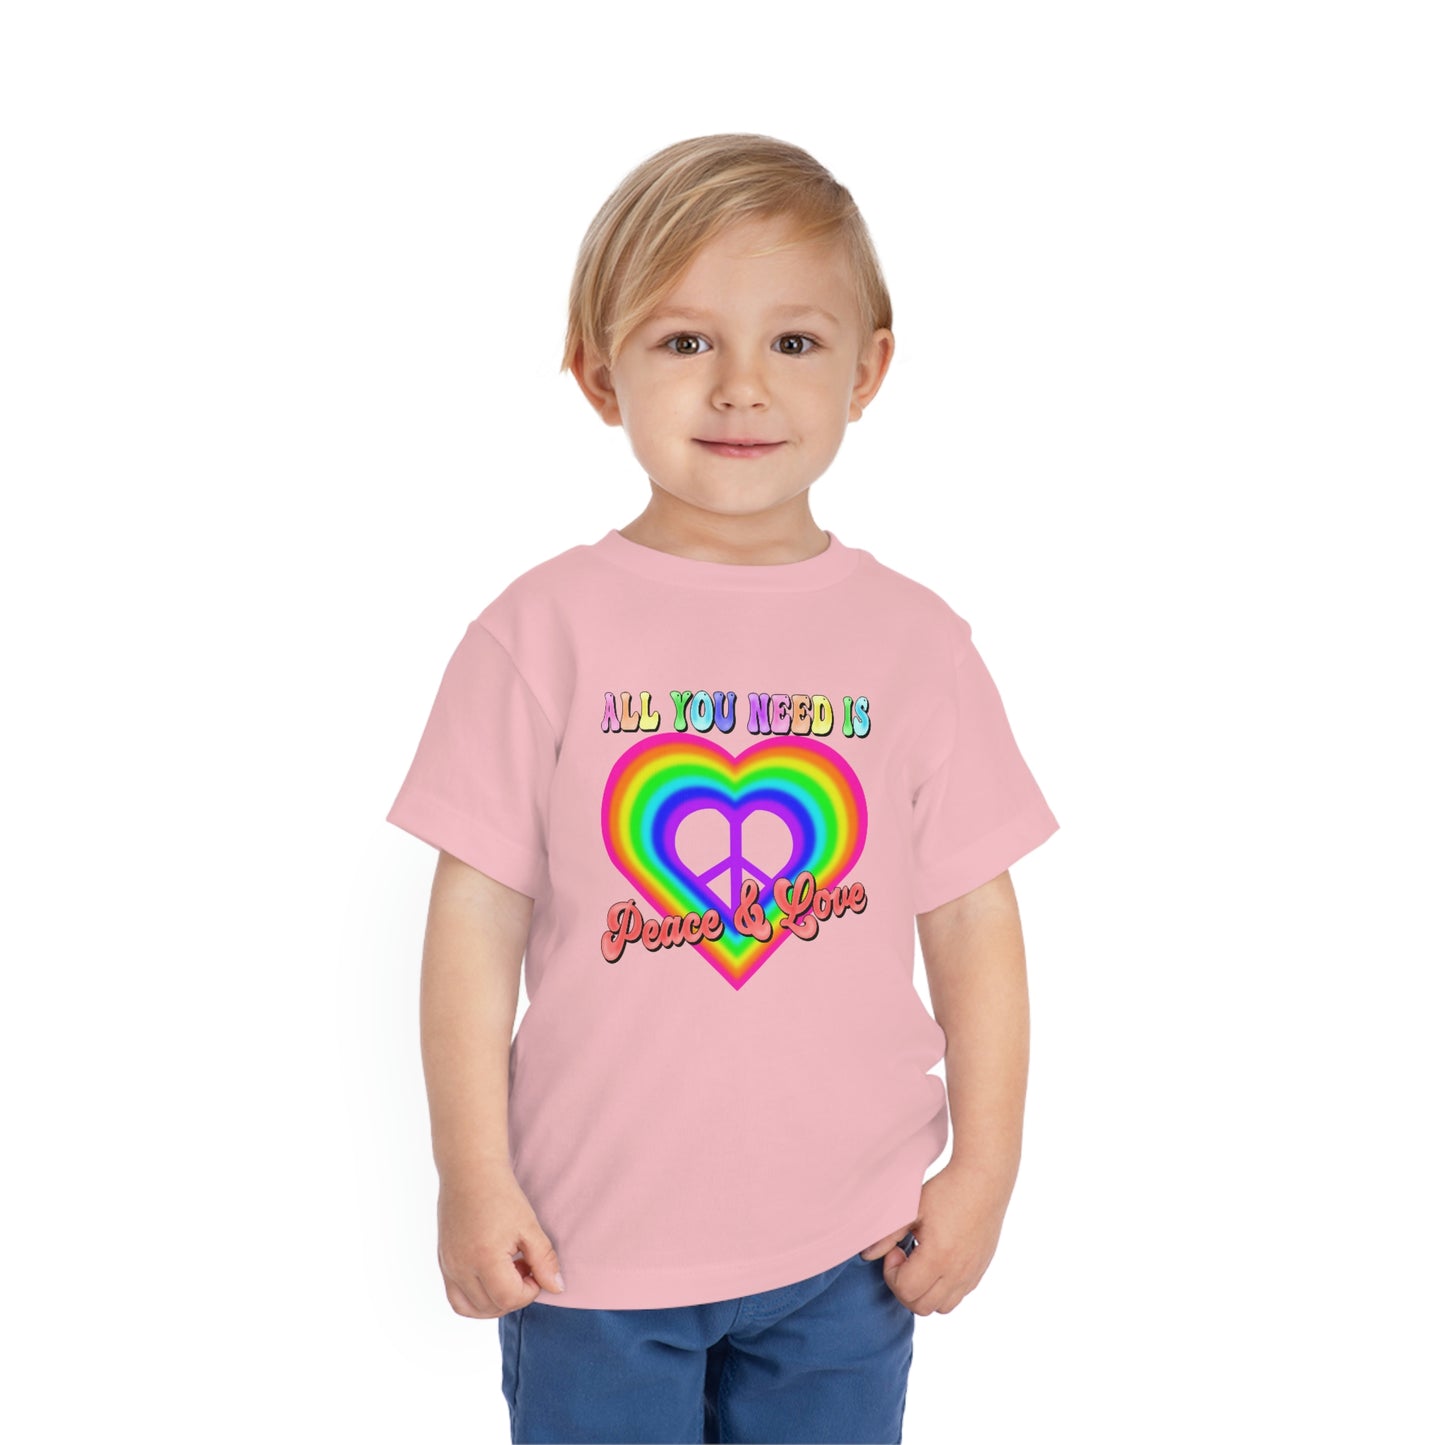 All You Need Toddler T-Shirt